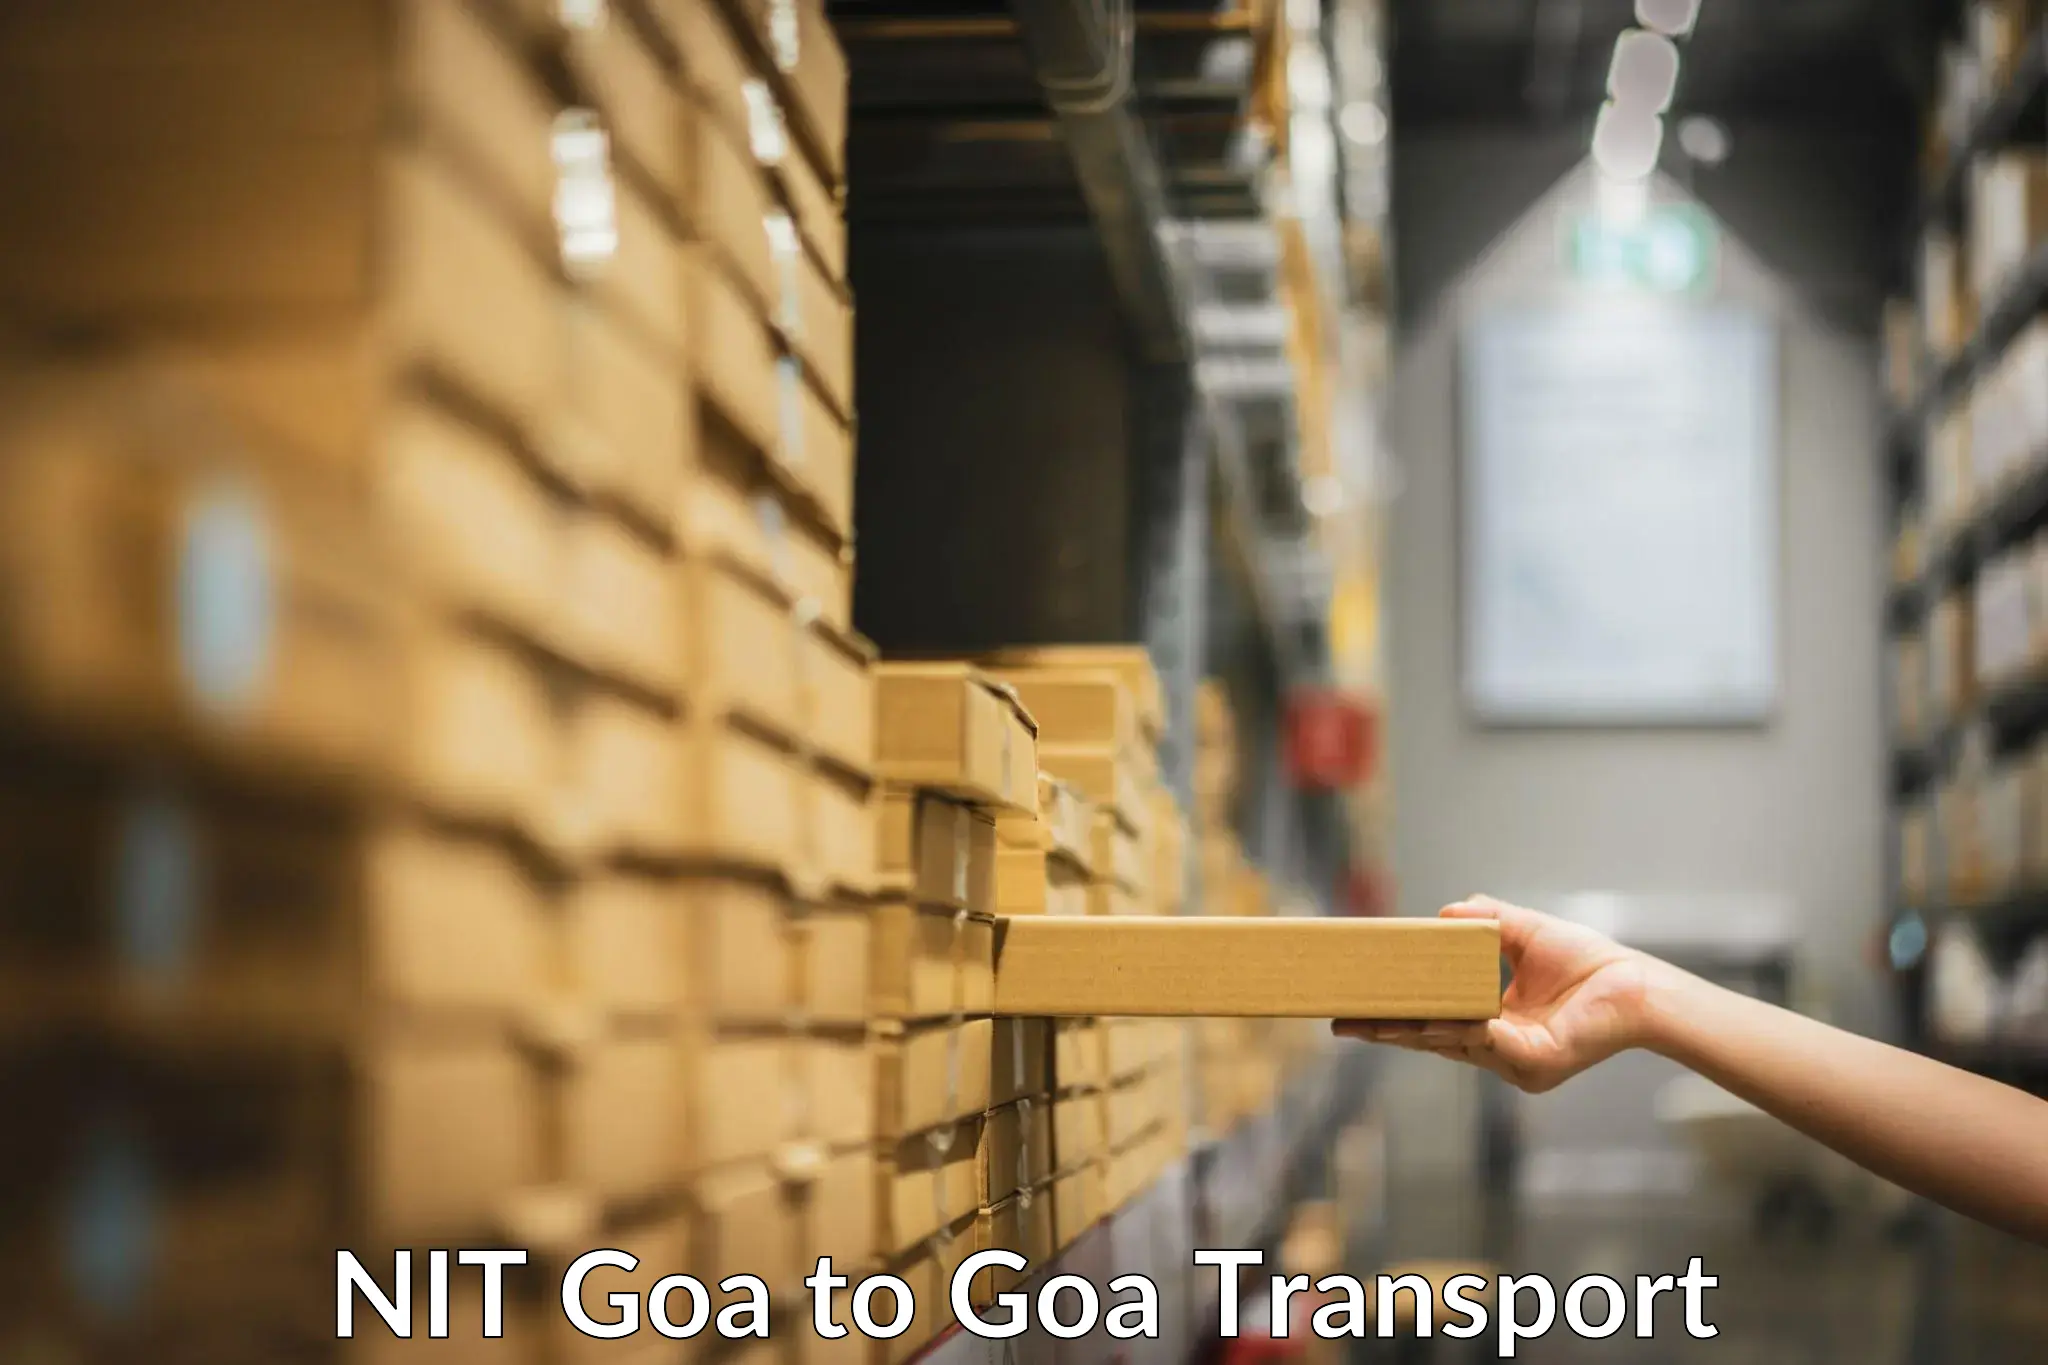 Transport bike from one state to another NIT Goa to Vasco da Gama